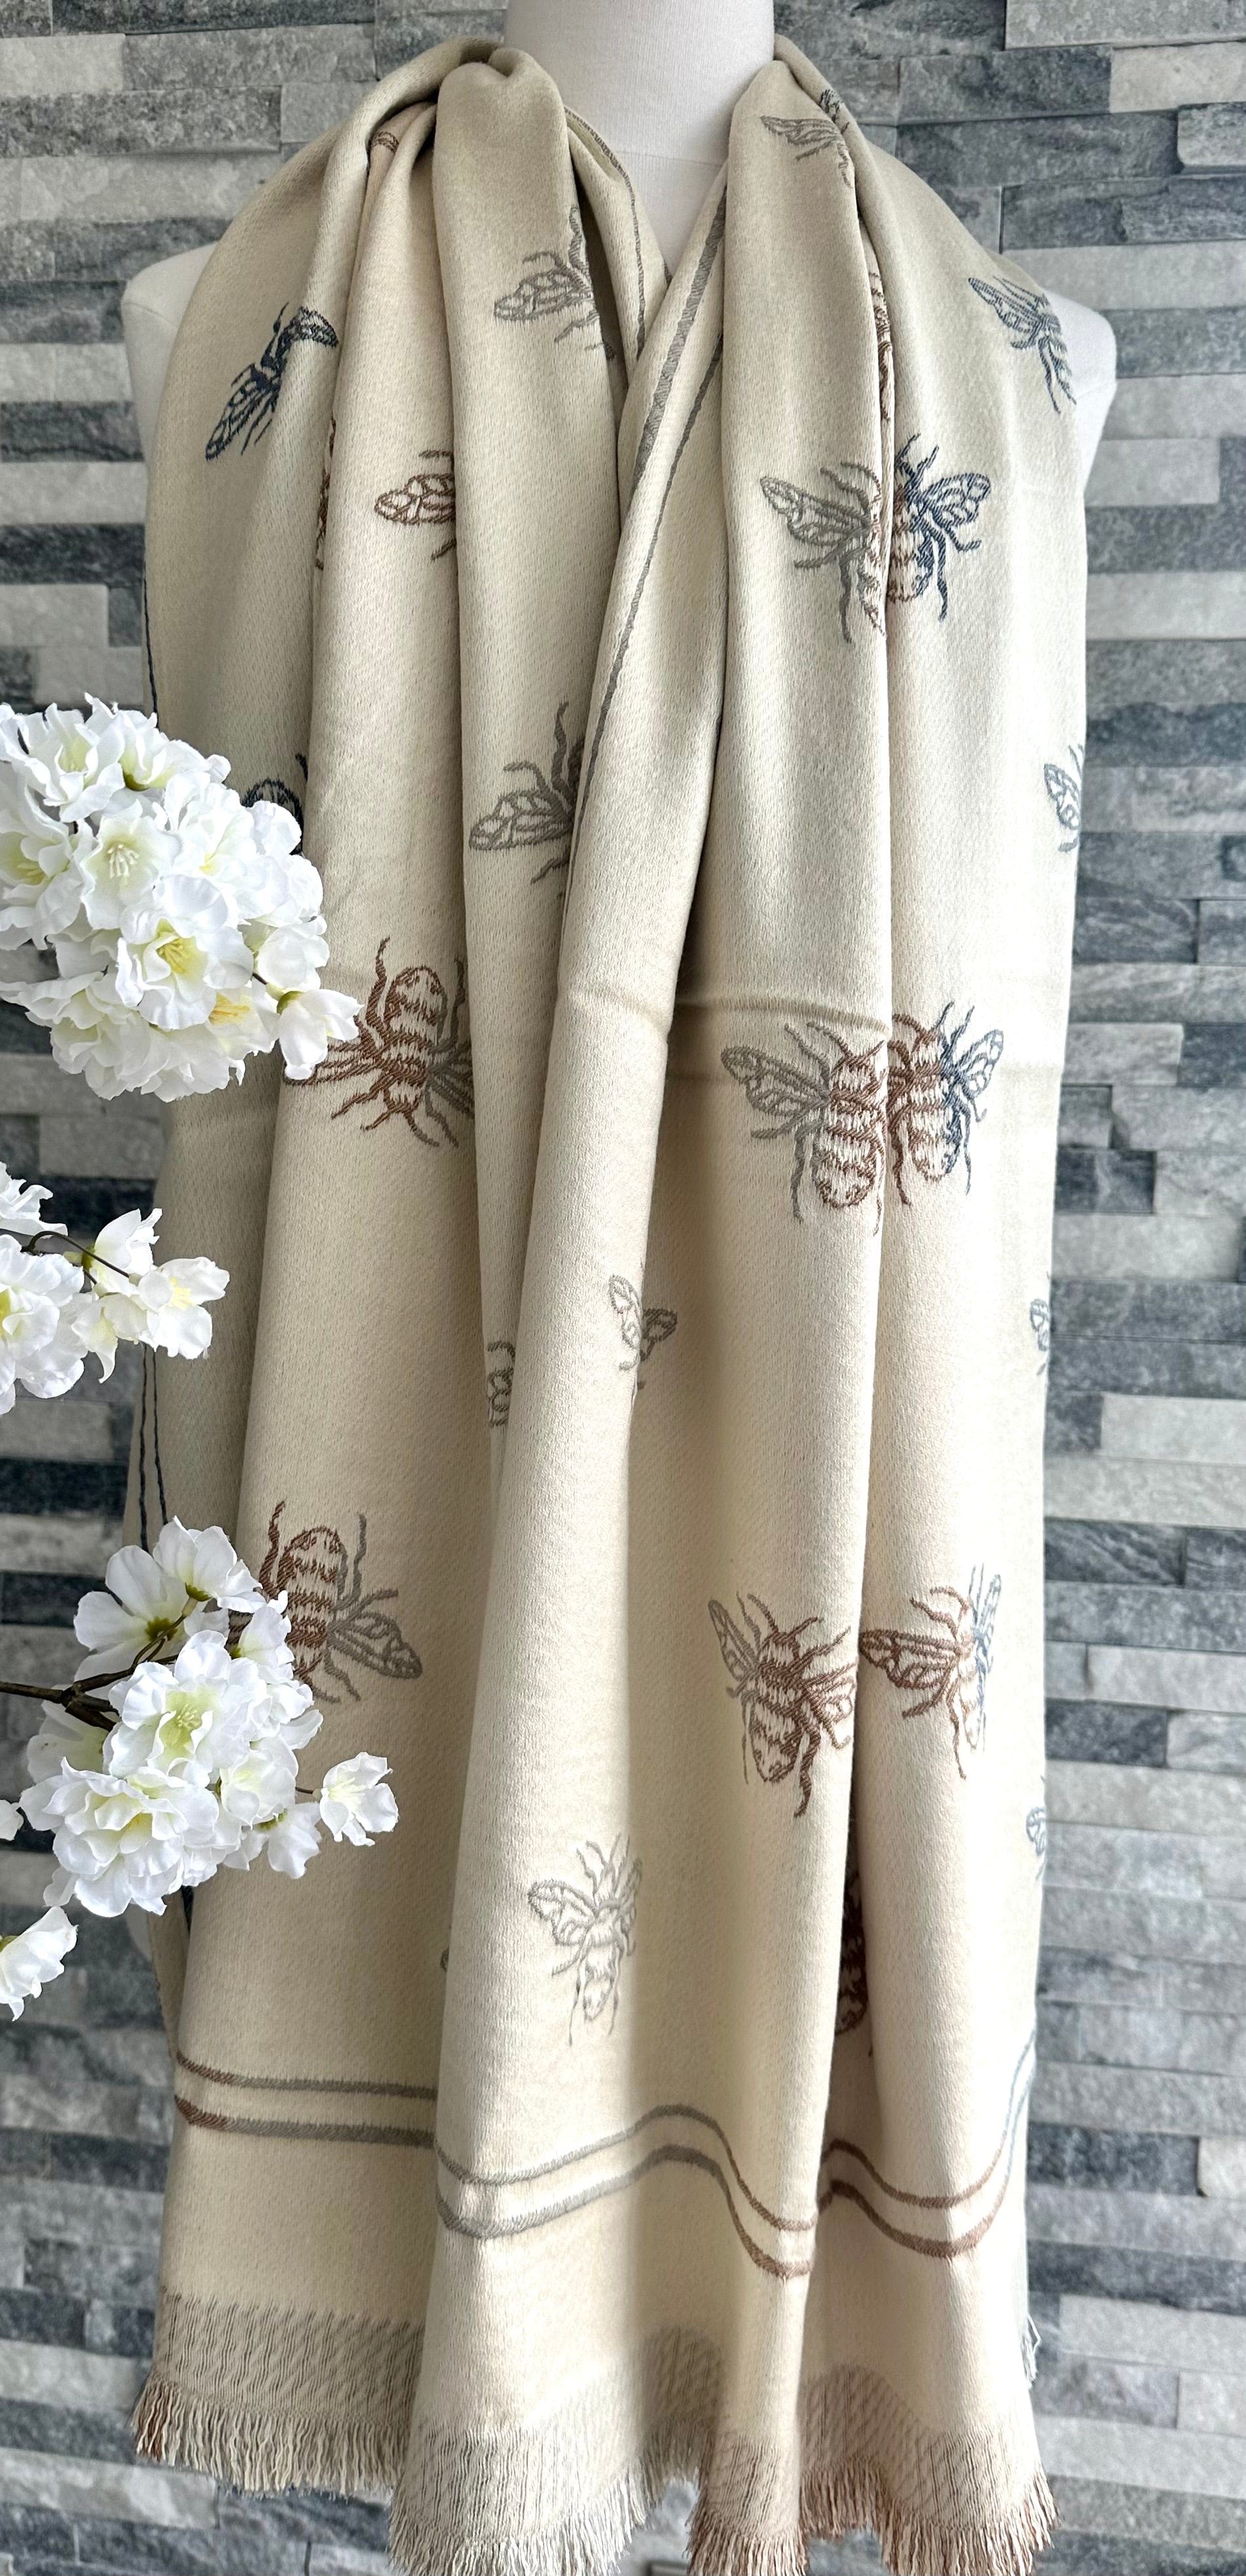 lusciousscarves Ladies Embroidered Bees Design Reversible Grey, Cream and Beige Scarf.